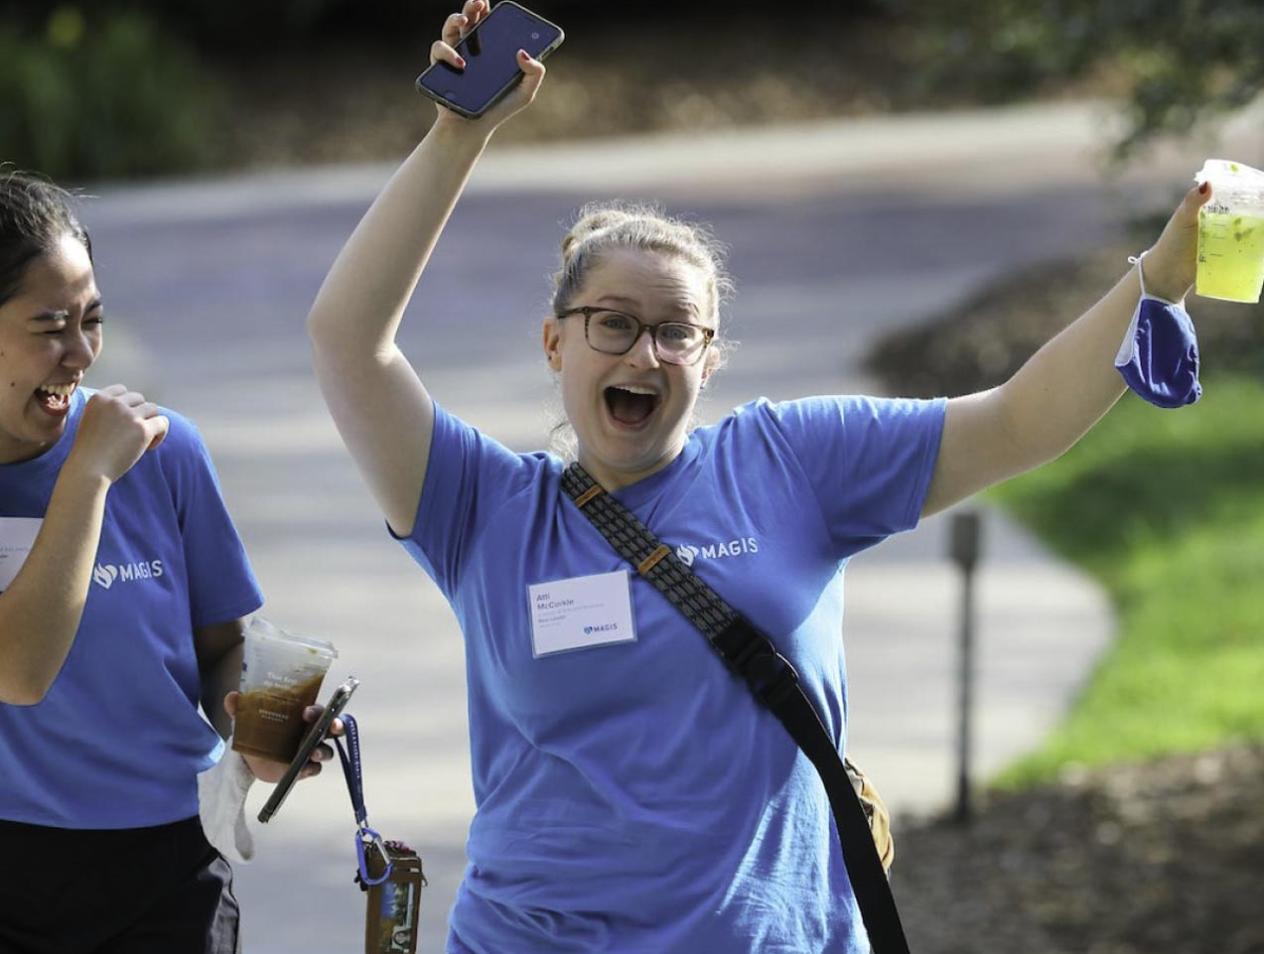 Student smiling and laughing while moving in Creighton.